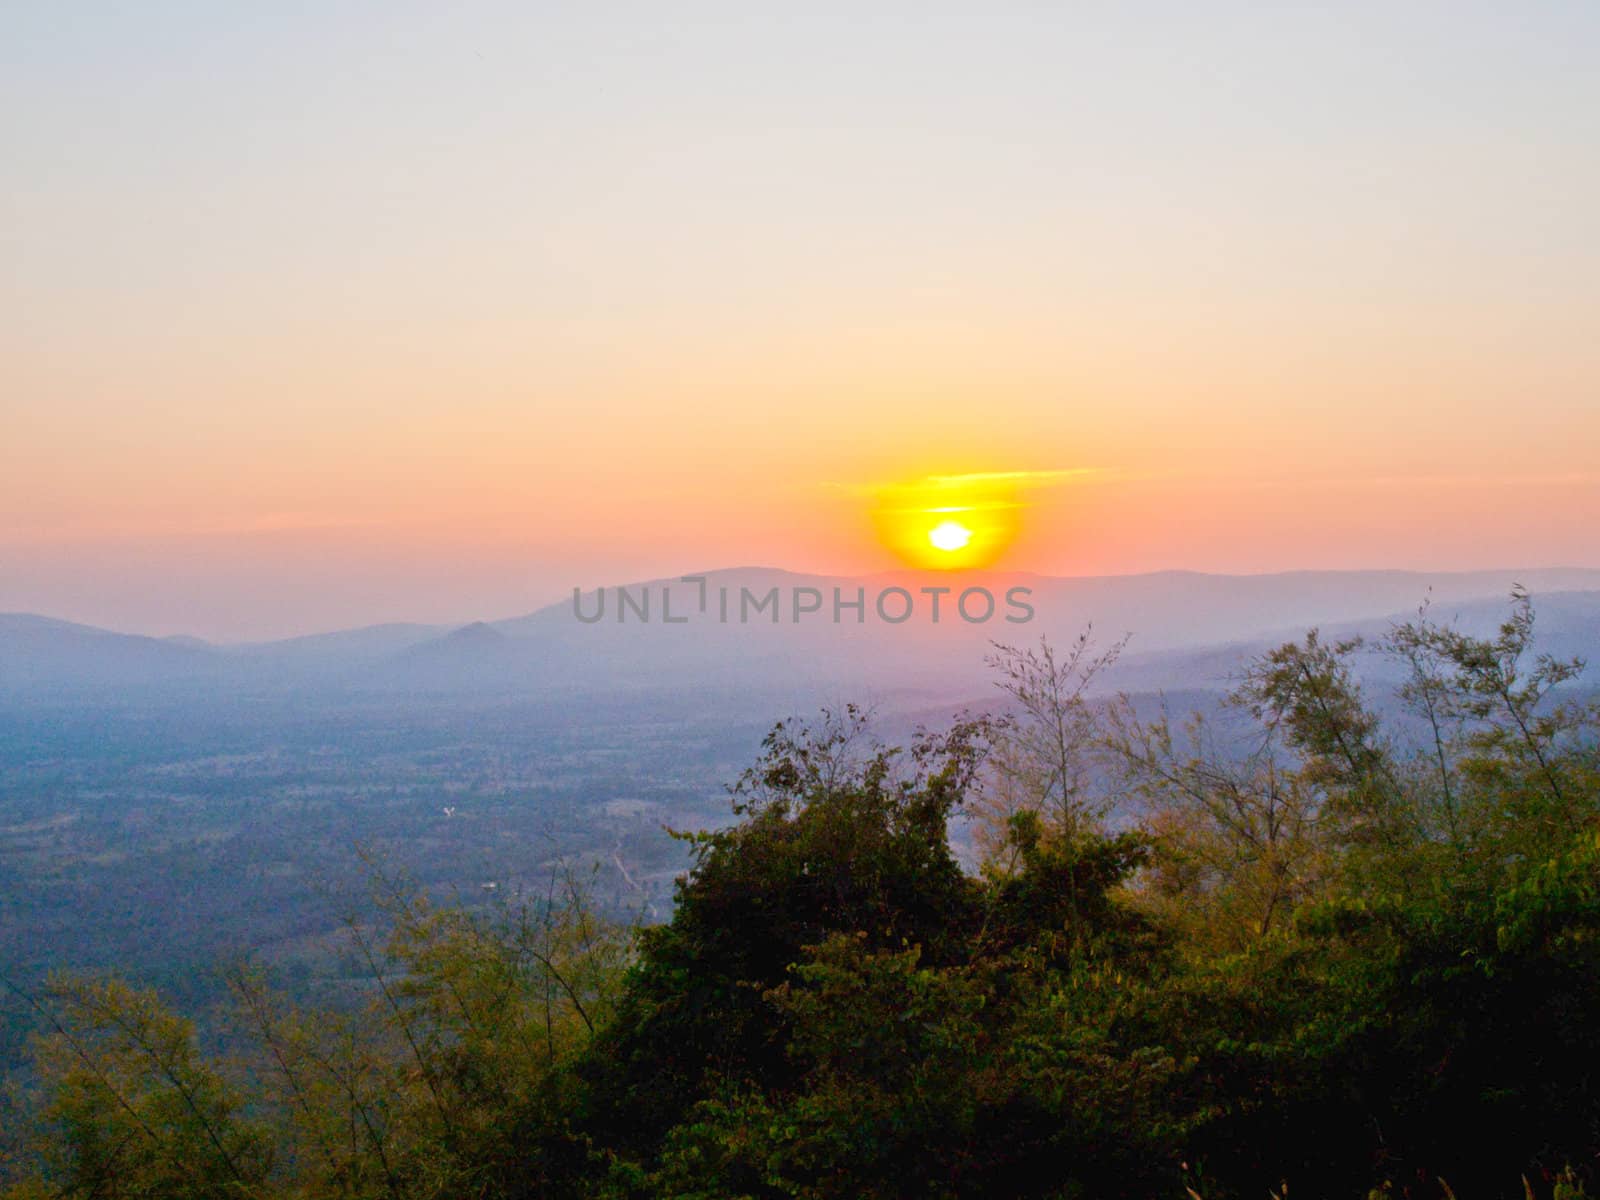 Sunset in the mountains landscape in Nakorn Ratchasima, Thailand by gururugu